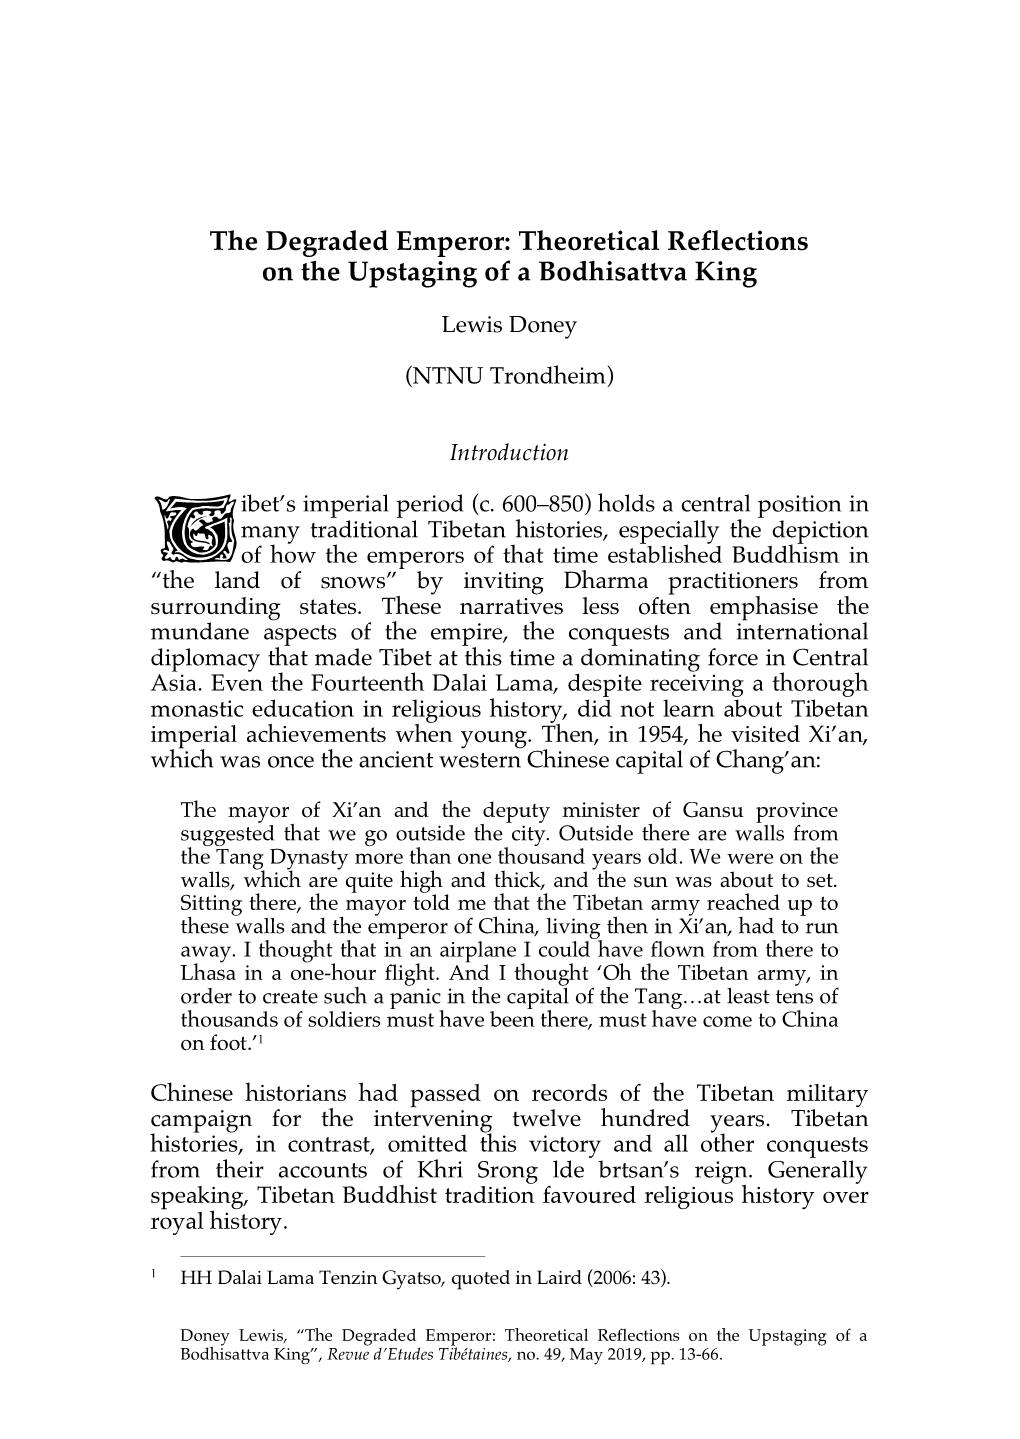 The Degraded Emperor: Theoretical Reflections on the Upstaging of a Bodhisattva King